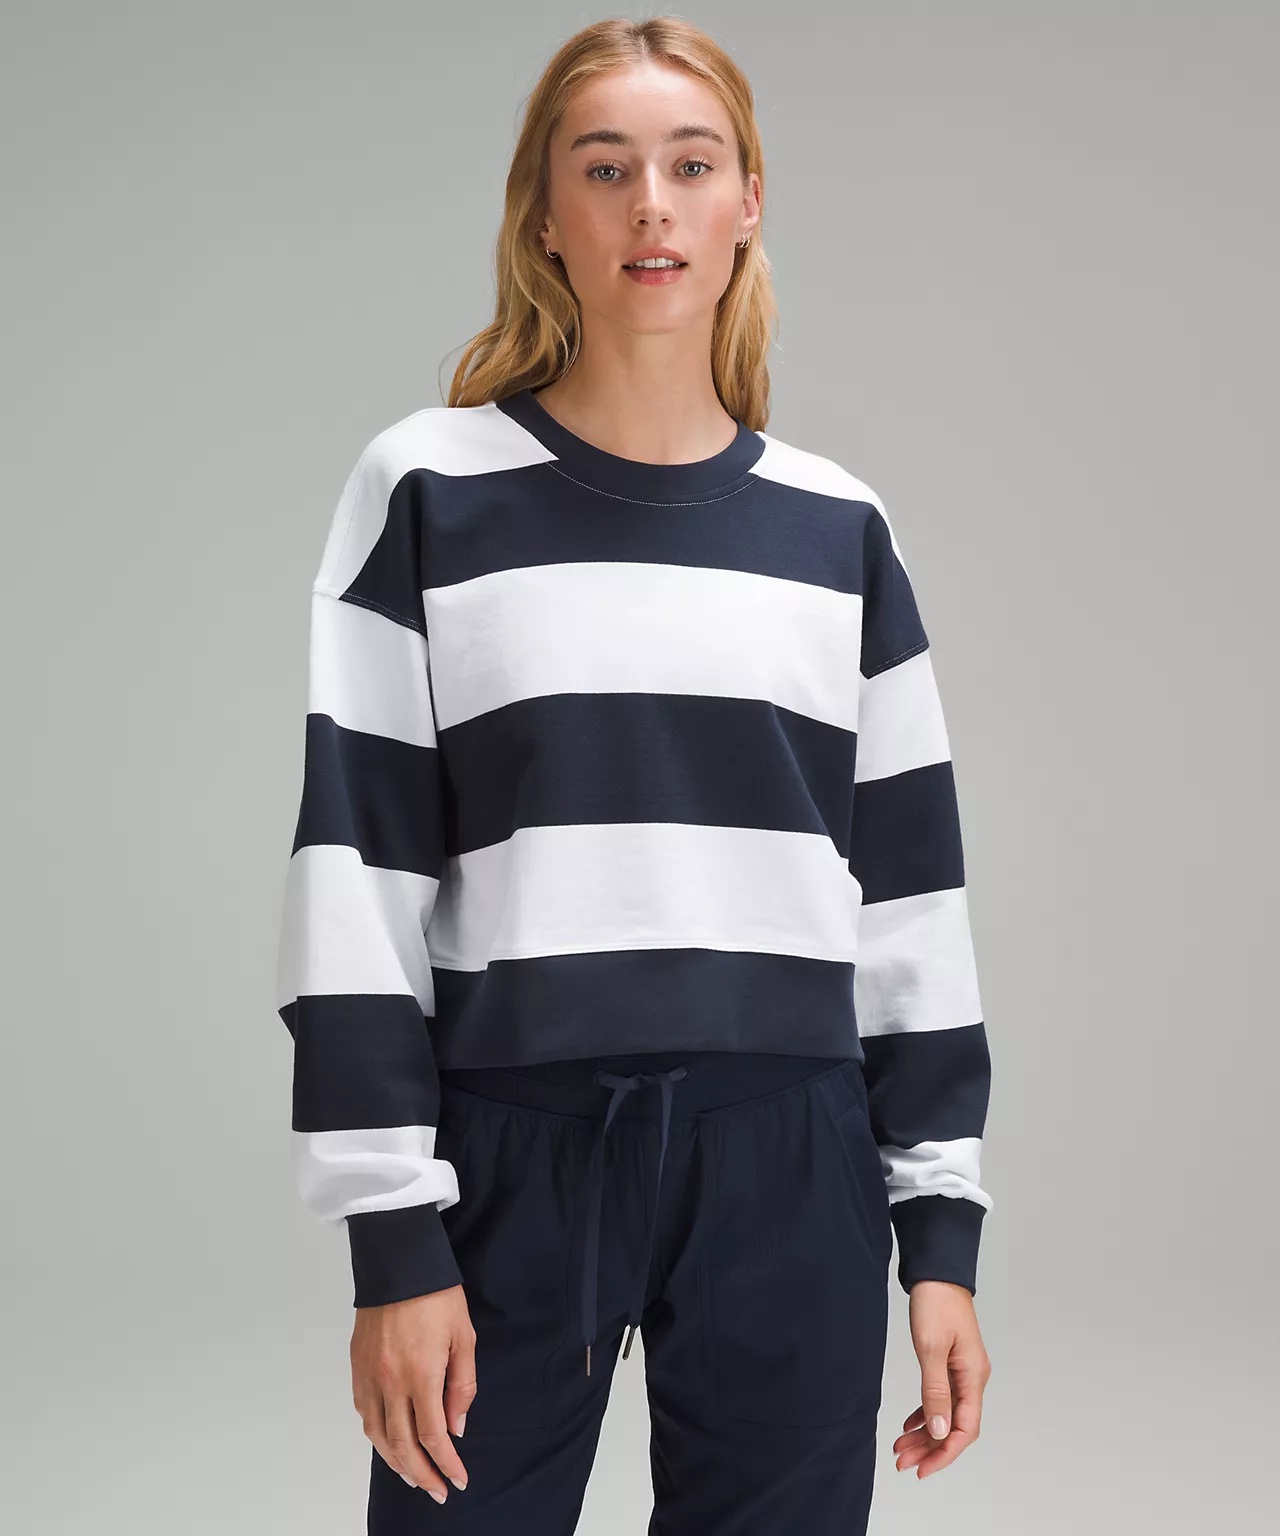 Perfectly Oversized Cropped Crew Stripe Online Only for lululemon's weekly product drop